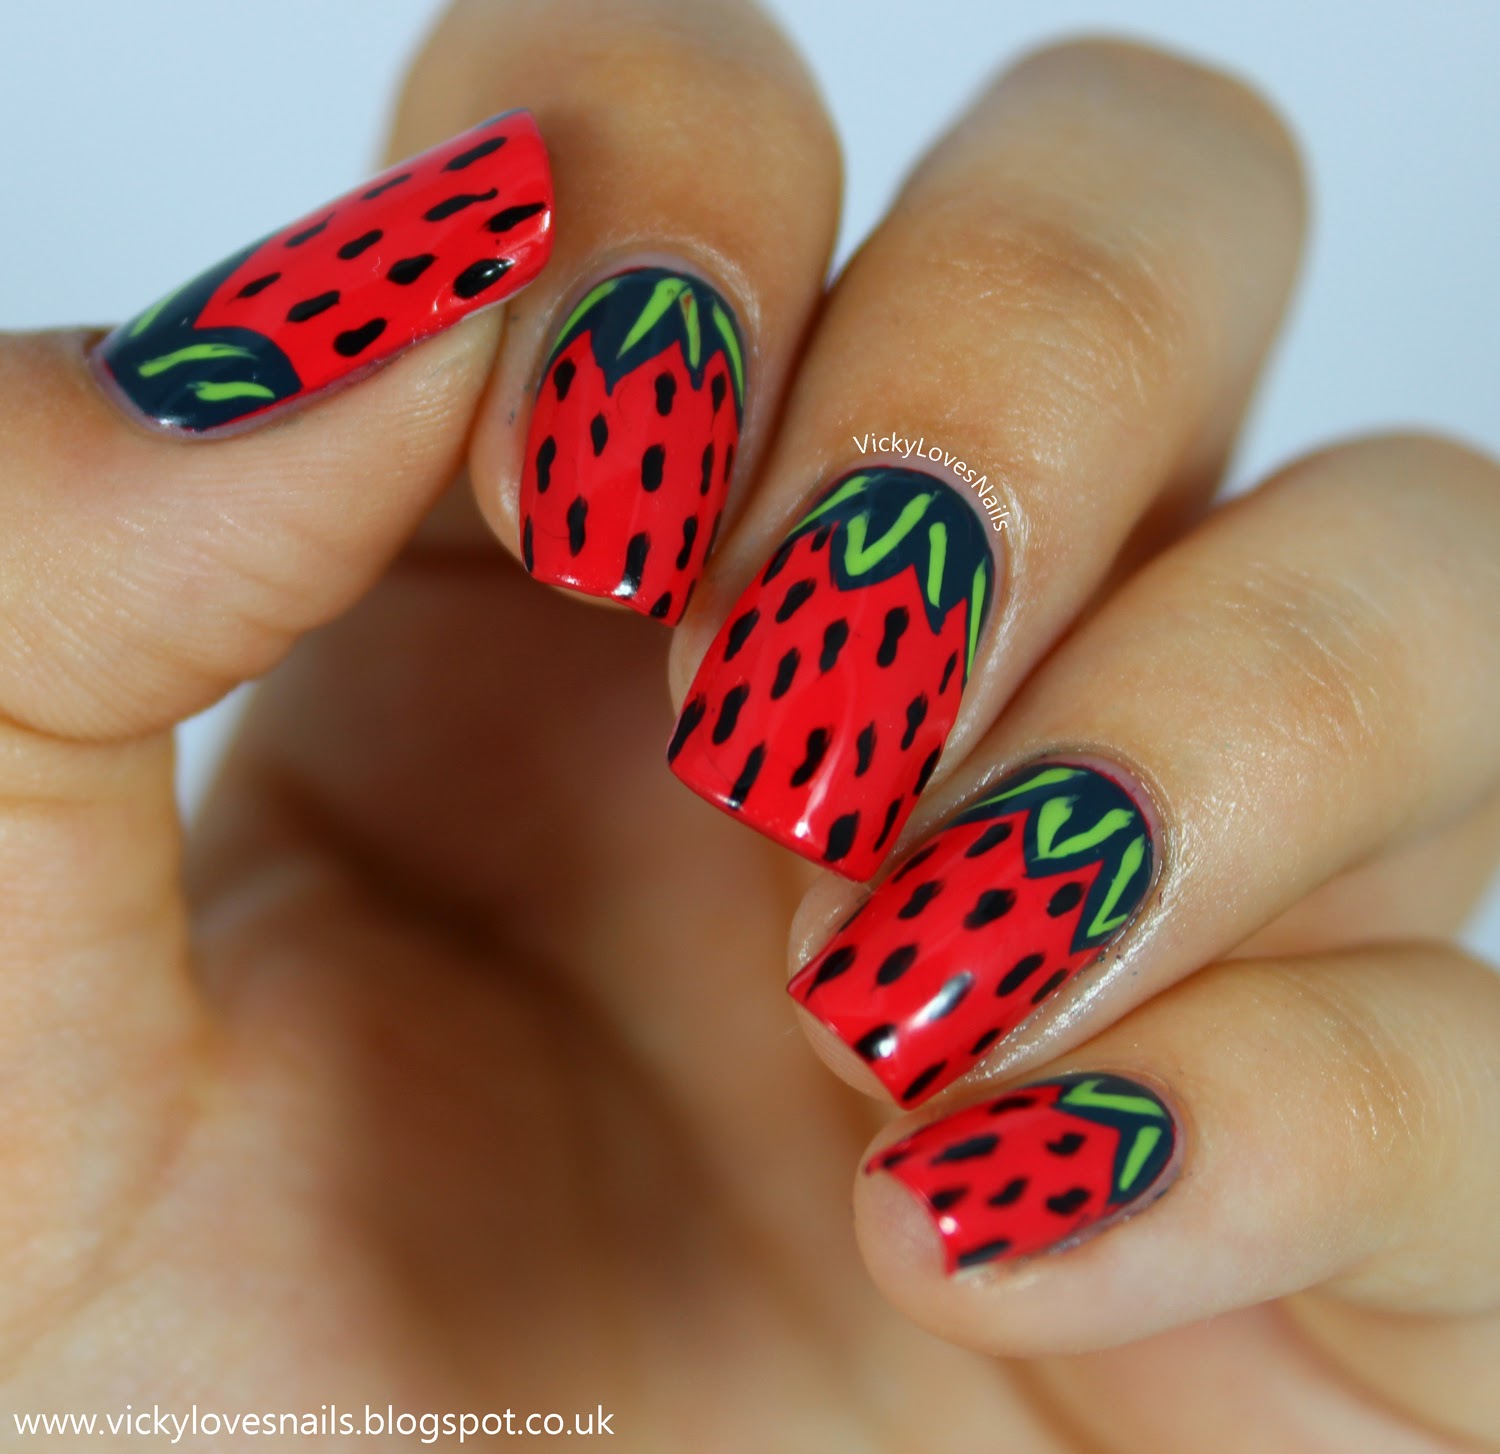 Vicky Loves Nails!: Life In Lacquer's Nail Art Challenge: Inspired by ...